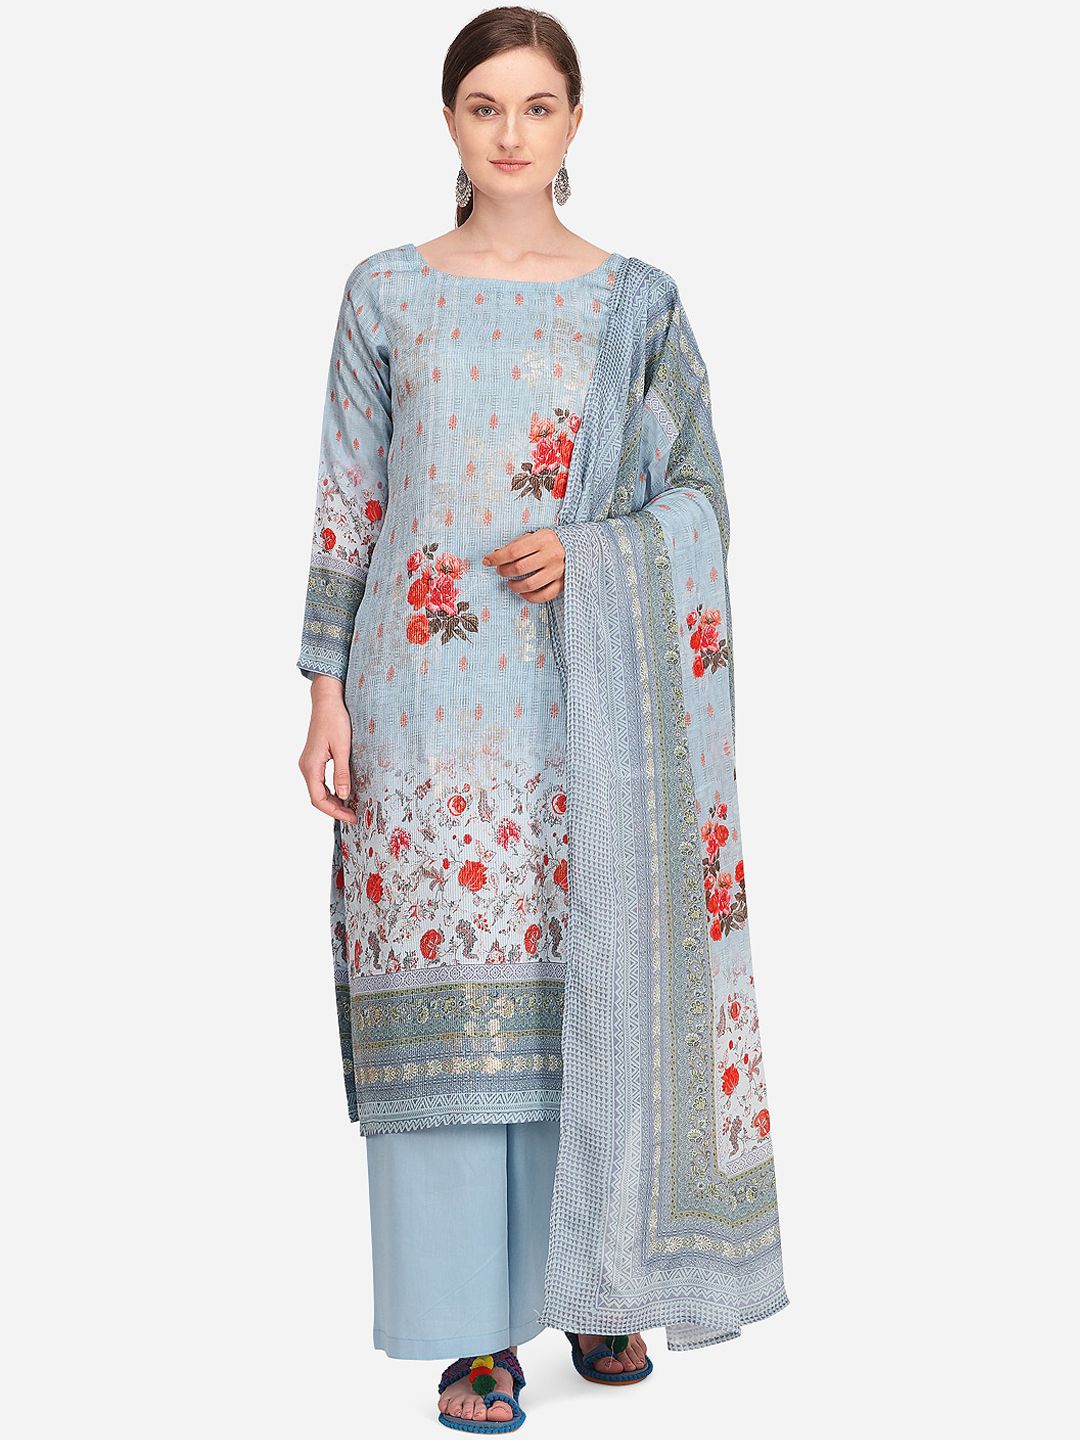 Stylee LIFESTYLE Women Blue & Red Printed Unstitched Dress Material Price in India